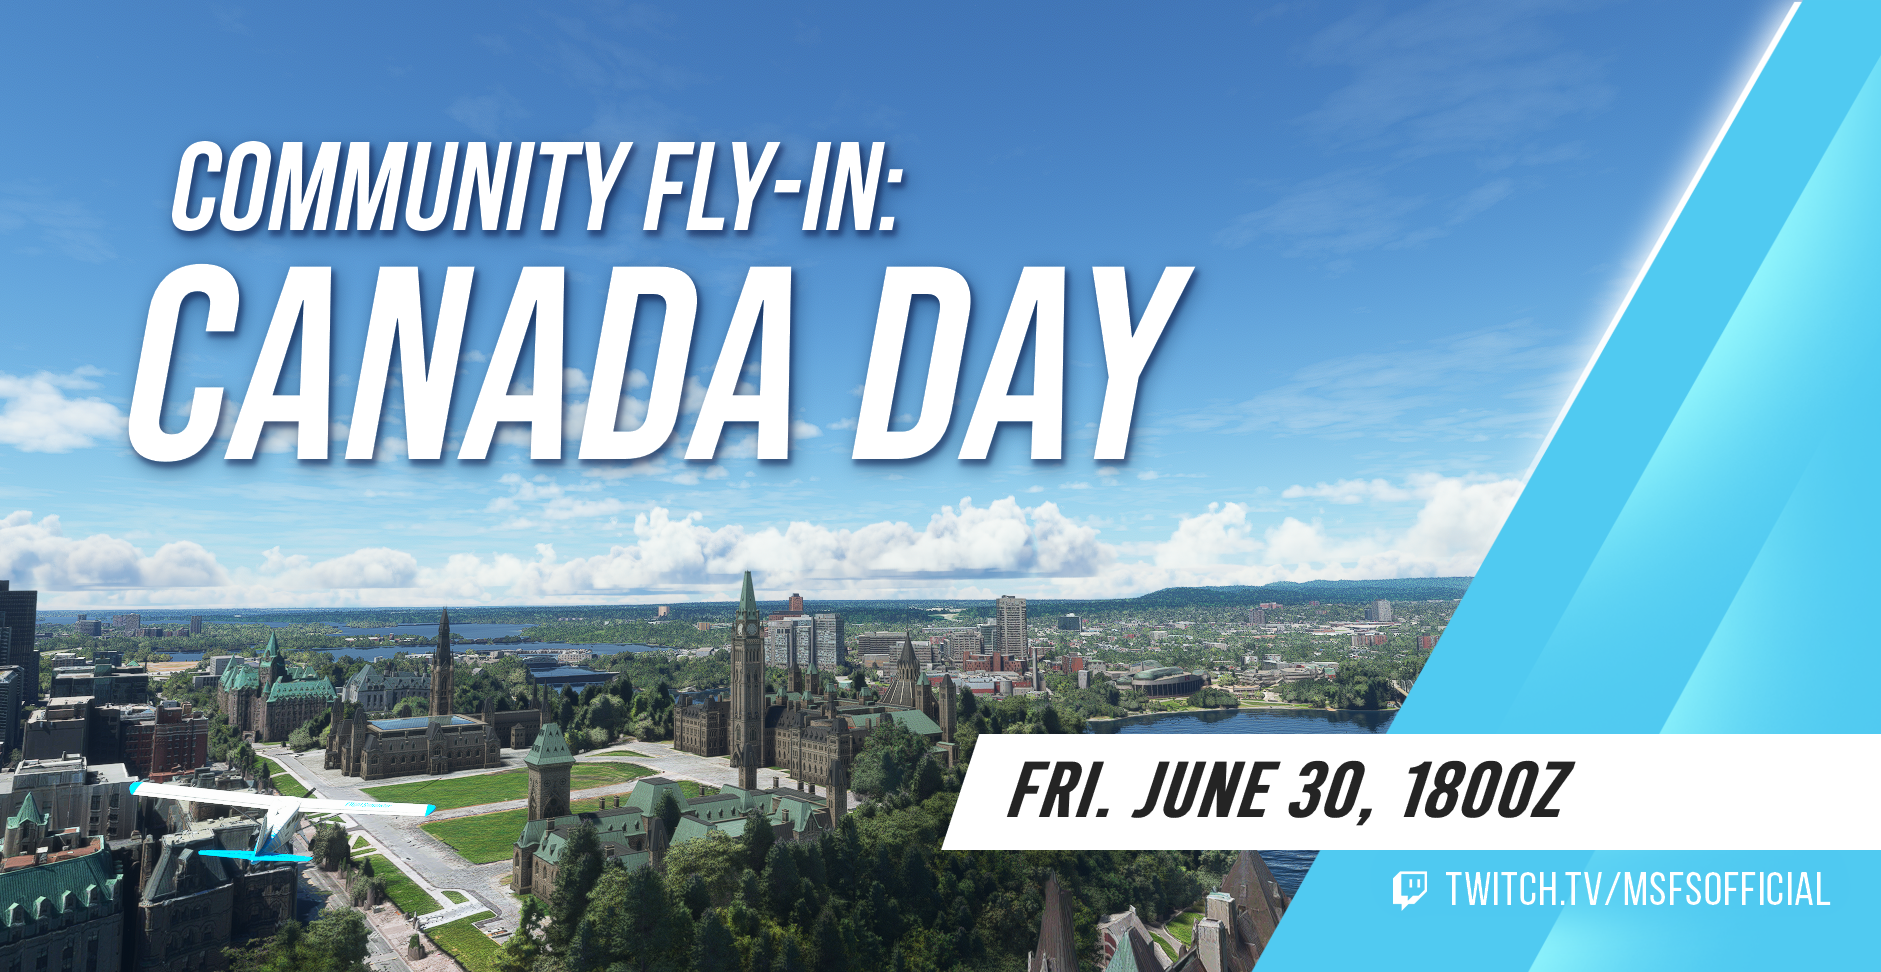 A de Havilland Canada DHC-2 Beaver flies towards the Parliament Hill in Ottawa, Ontario. Community Fly-In: Canada Day. Join us on Friday June 30th at 1800Z, at twitch.tv/msfsofficial!